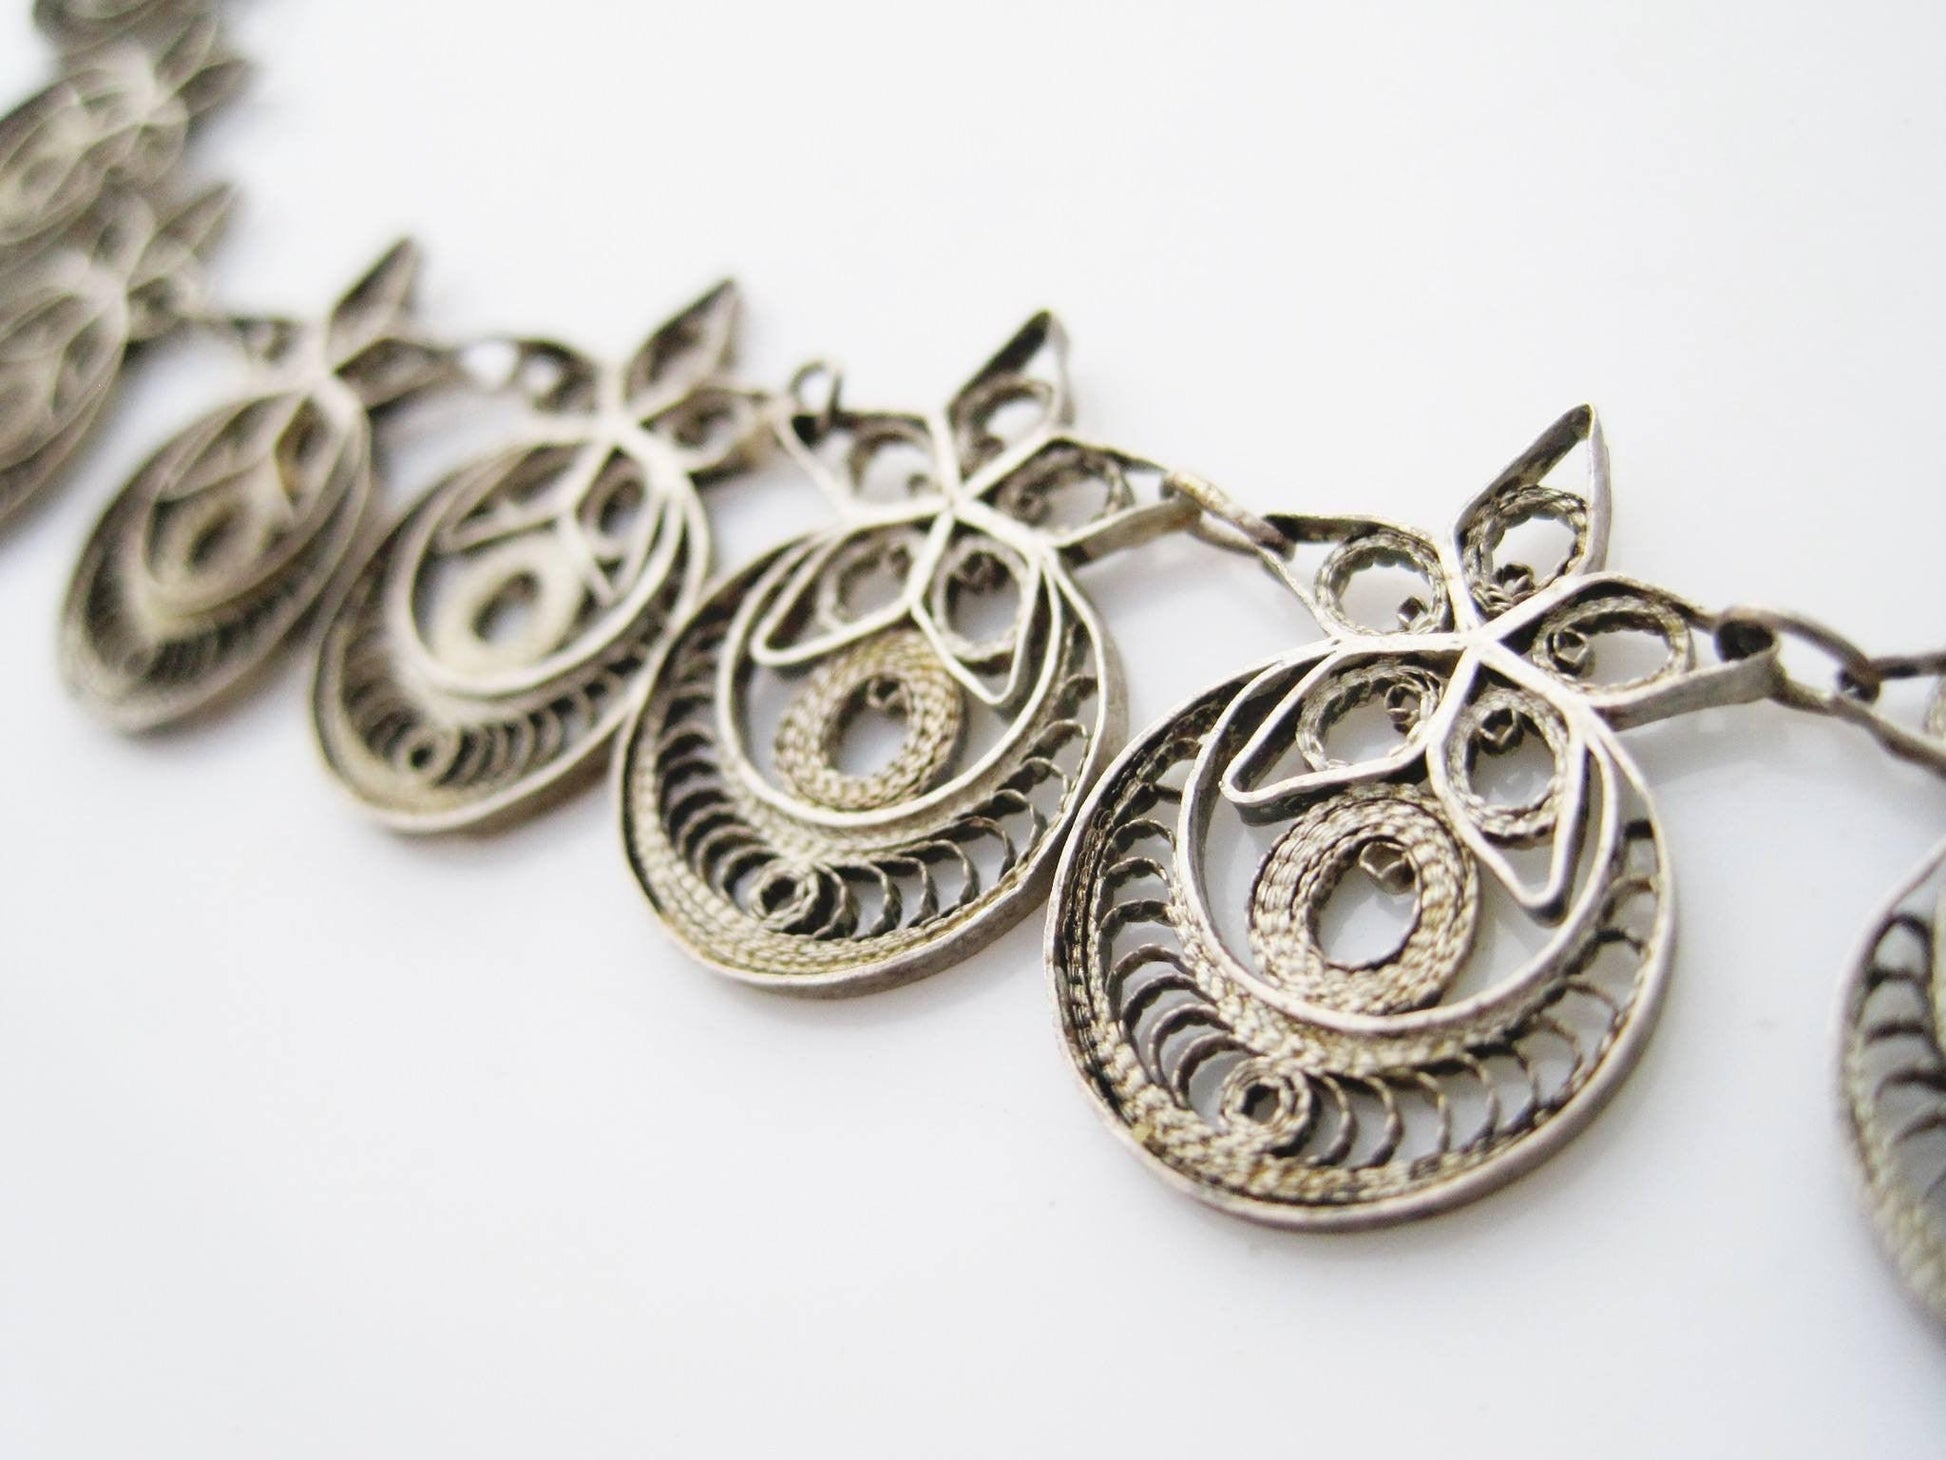 Vintage Silver Filigree Middle East Crescent Moon and Star Necklace - Anteeka